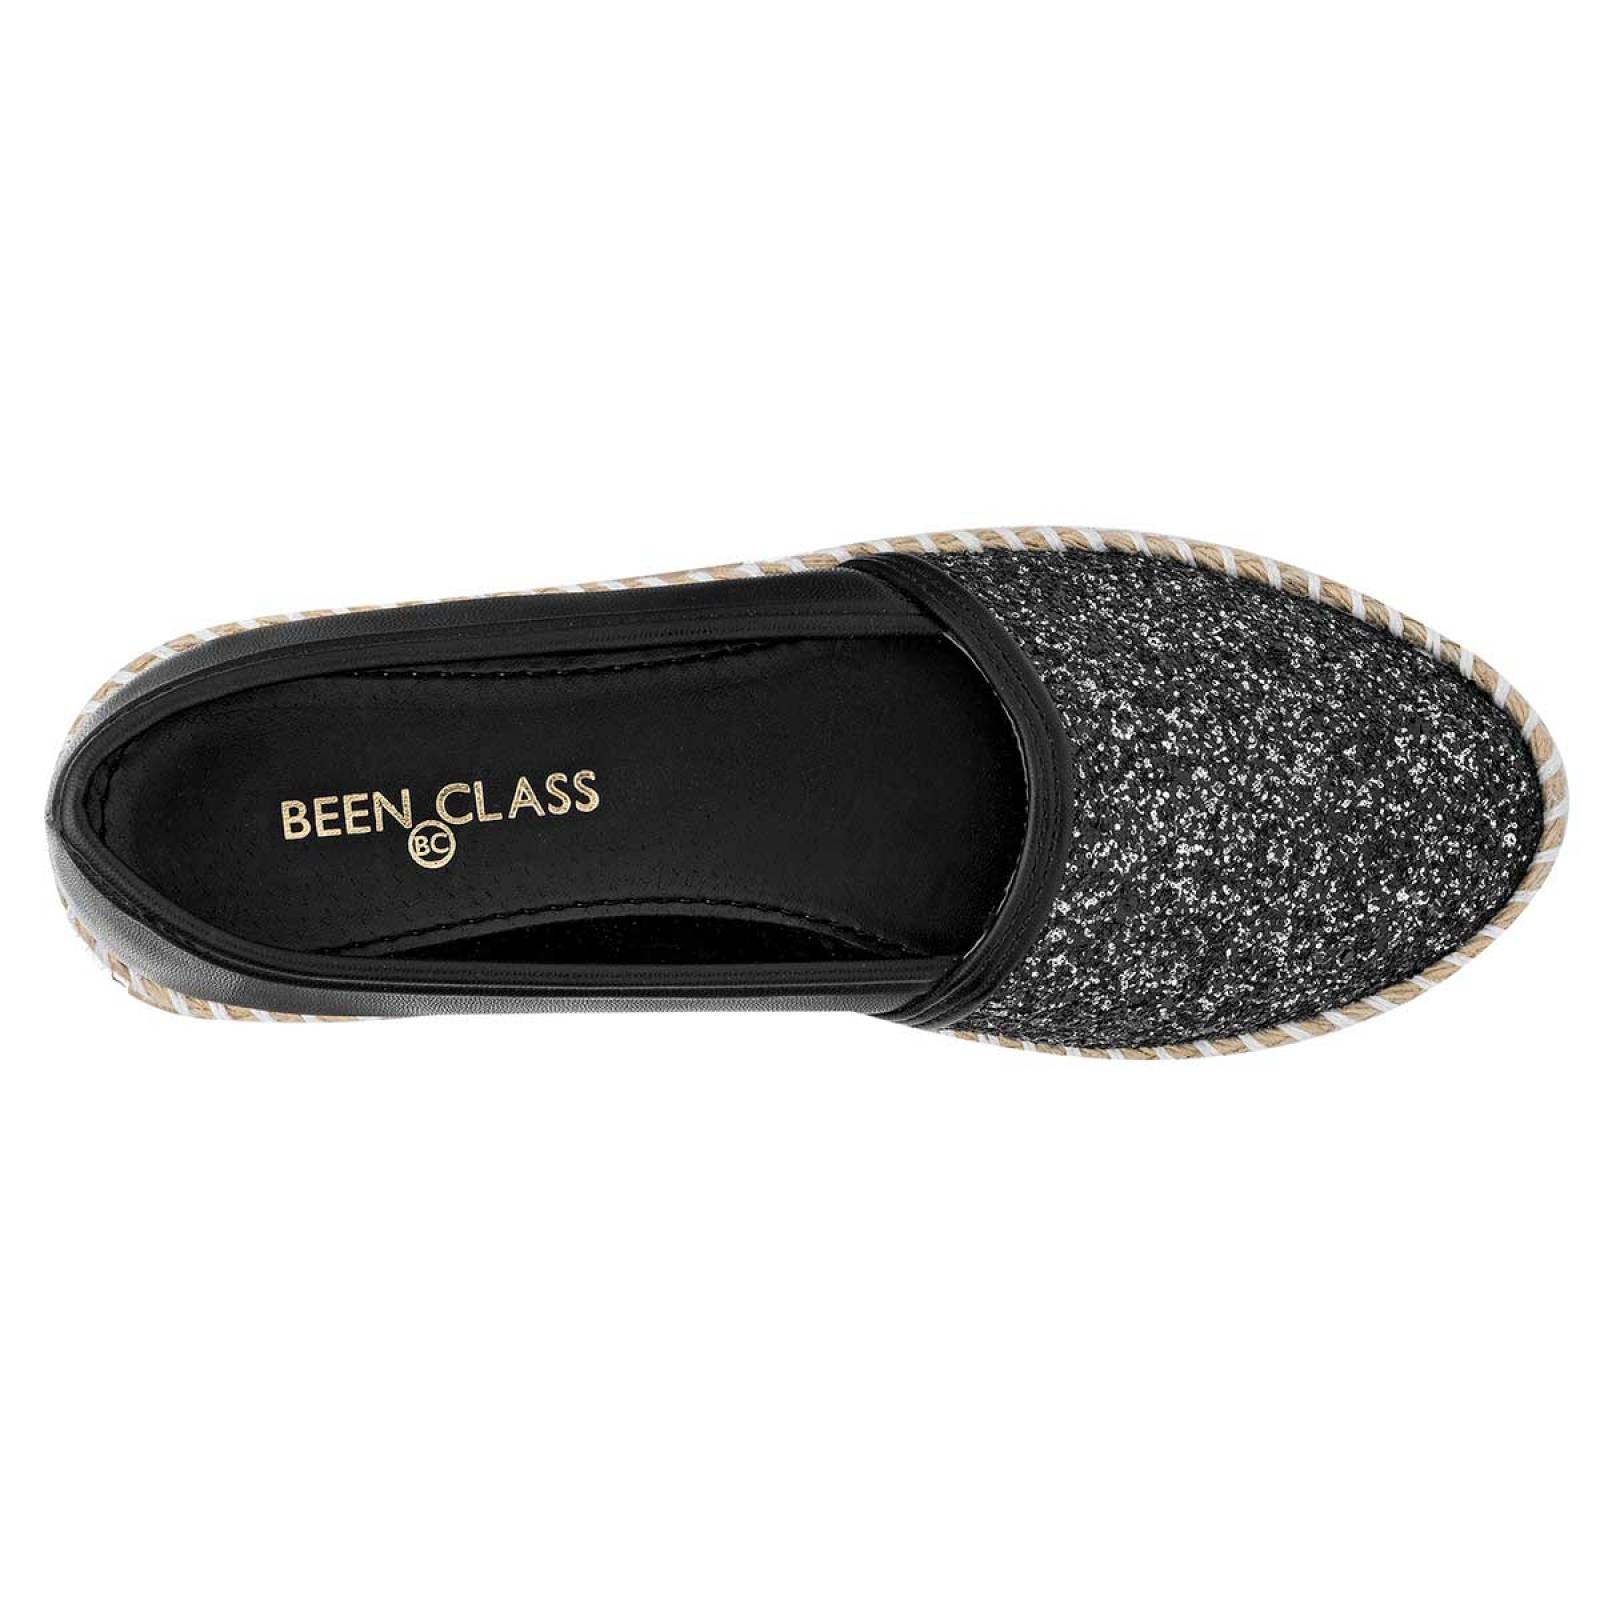 Been class Zapato Mujer Negro